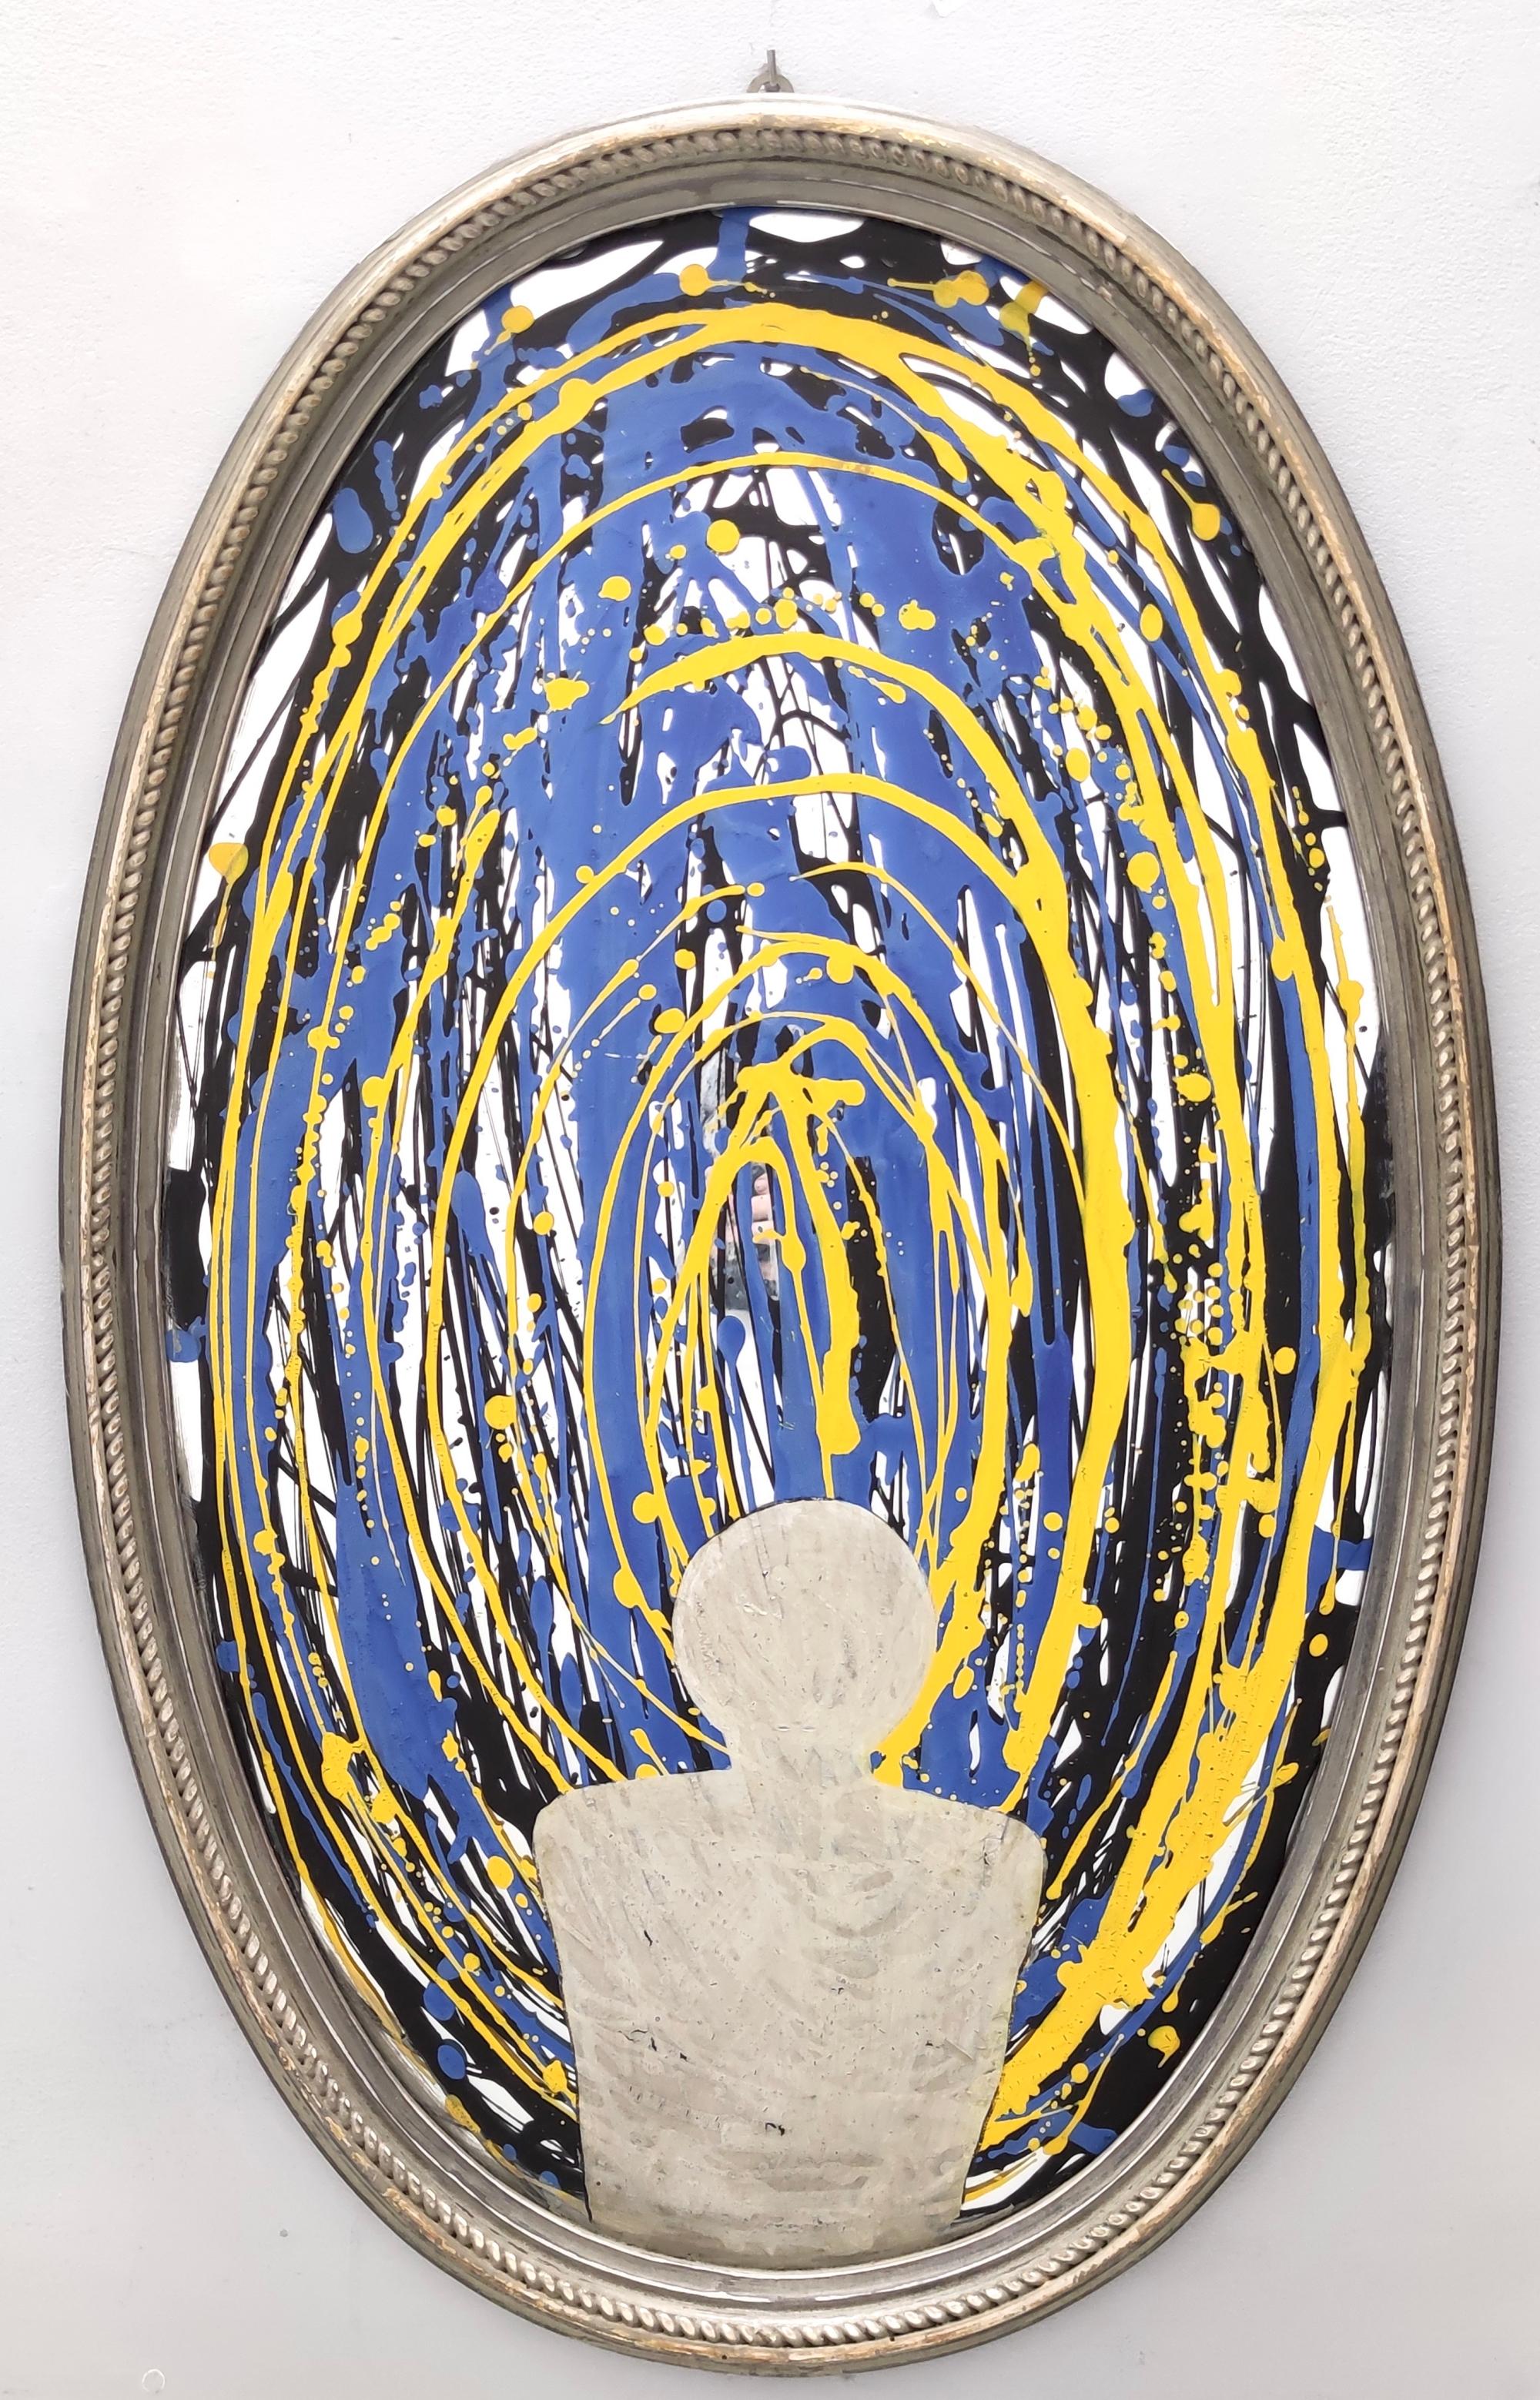 Translated title: "In front of the immense". 
Black, blue and yellow acrylic paint on a vintage mirror. 
